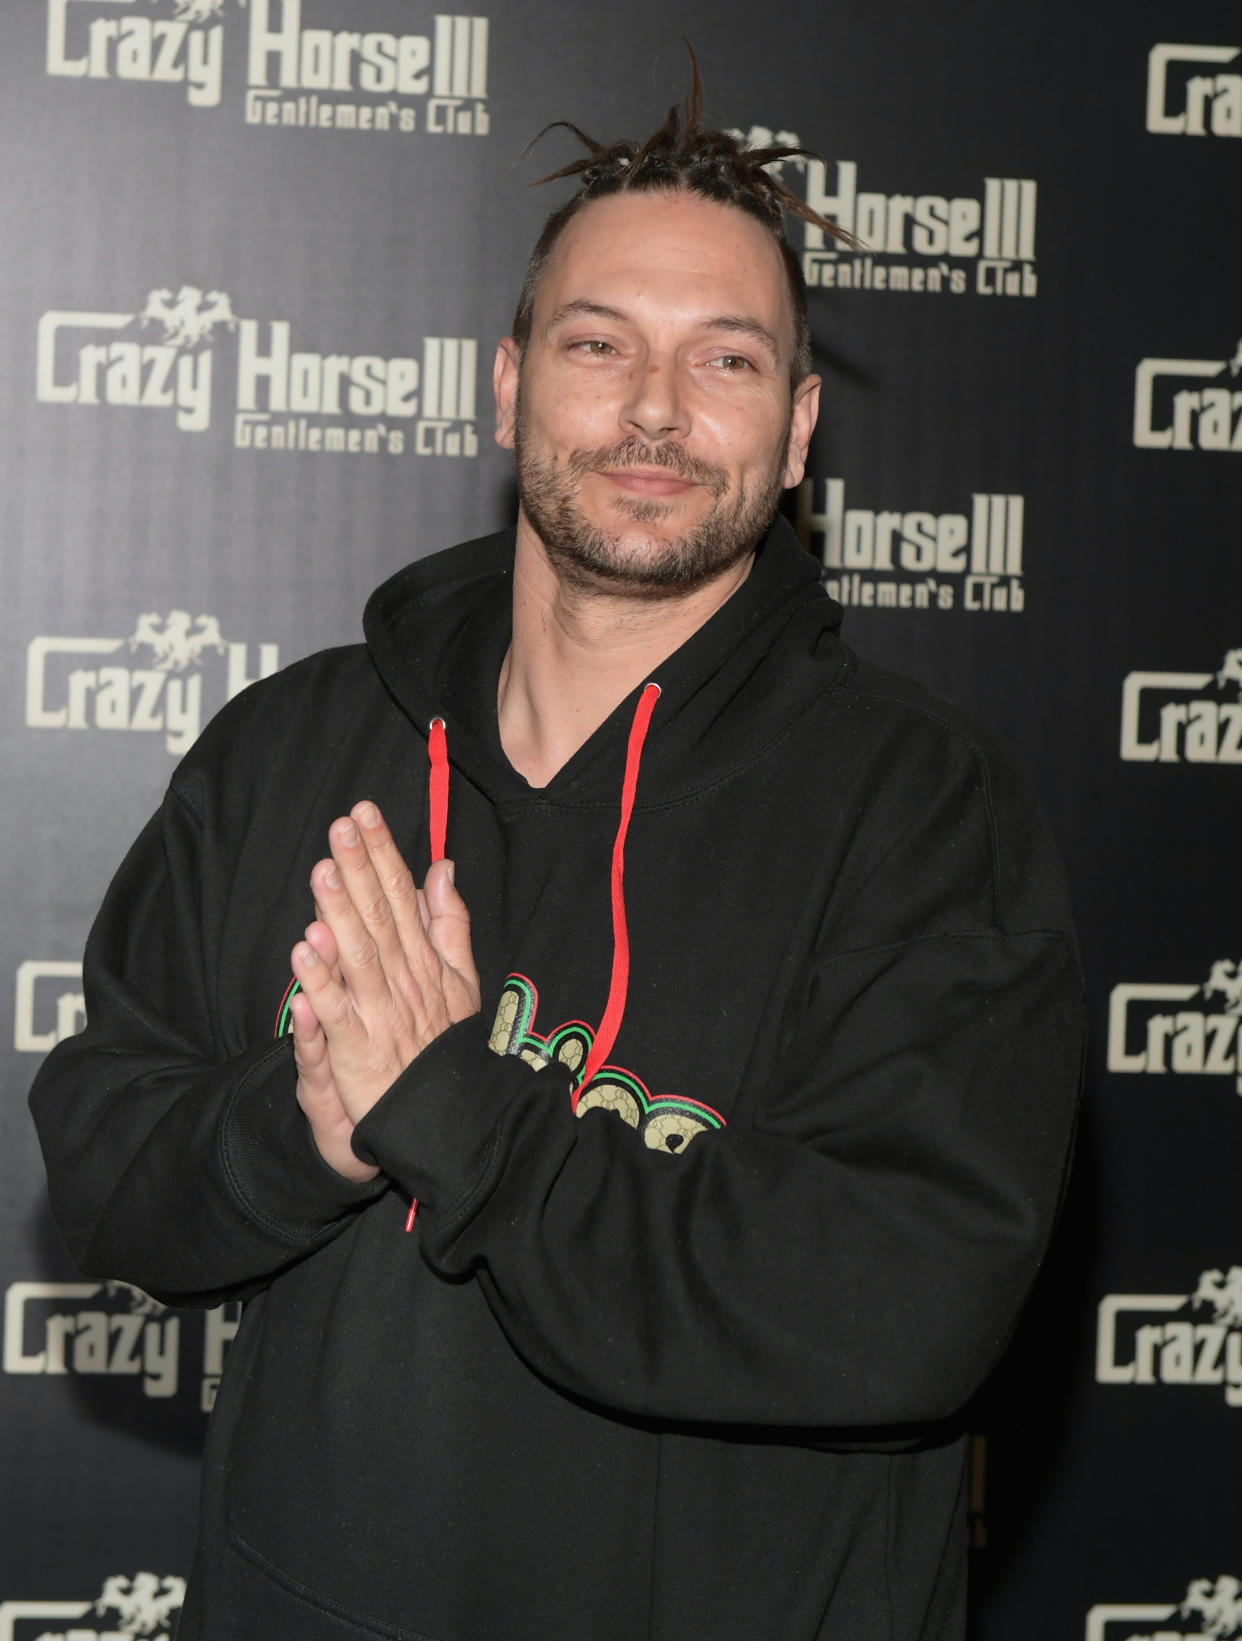 Kevin Federline told 60 Minutes Australia he believes Britney Spears's father Jamie saved her by putting her under a conservatorship. (Photo: Bryan Steffy/WireImage)